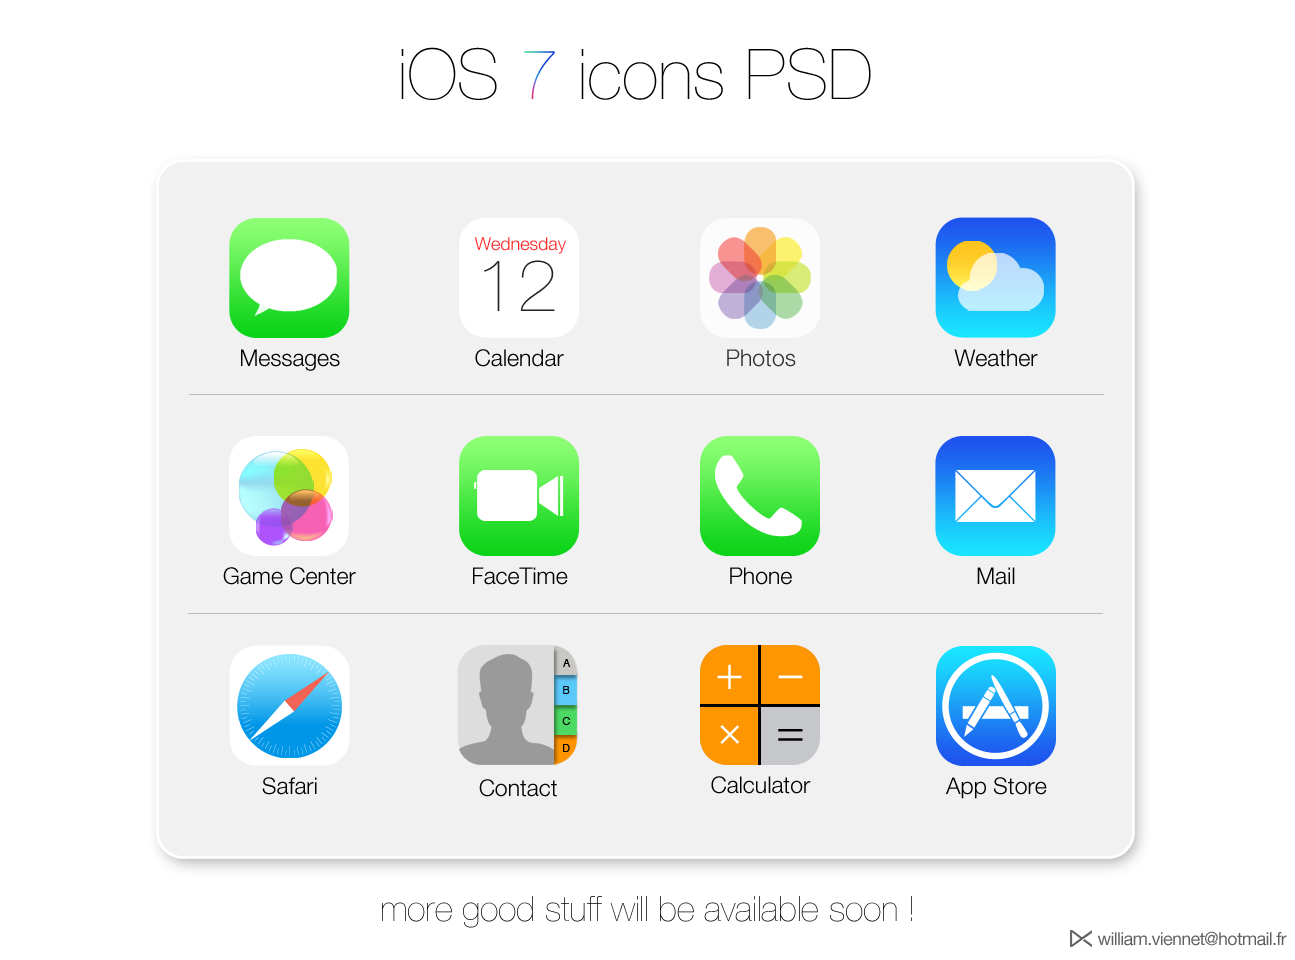 iOS 7 icons PSD by WillViennet 